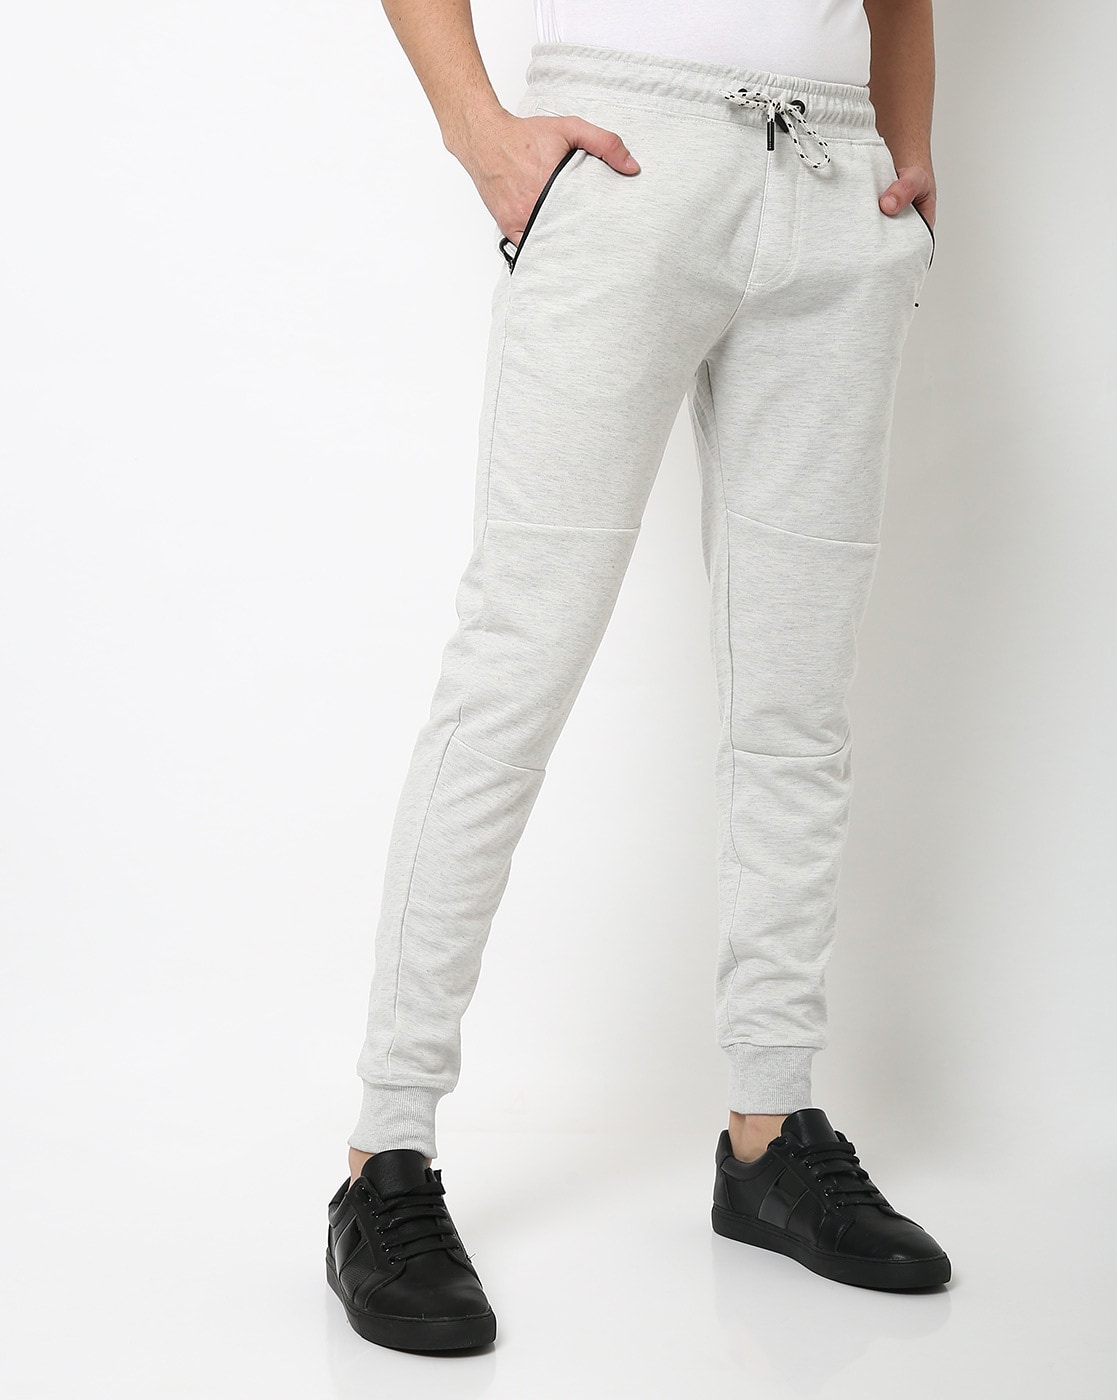 Buy LEE COOPER White Womens 4 Pocket Coated Jeans | Shoppers Stop